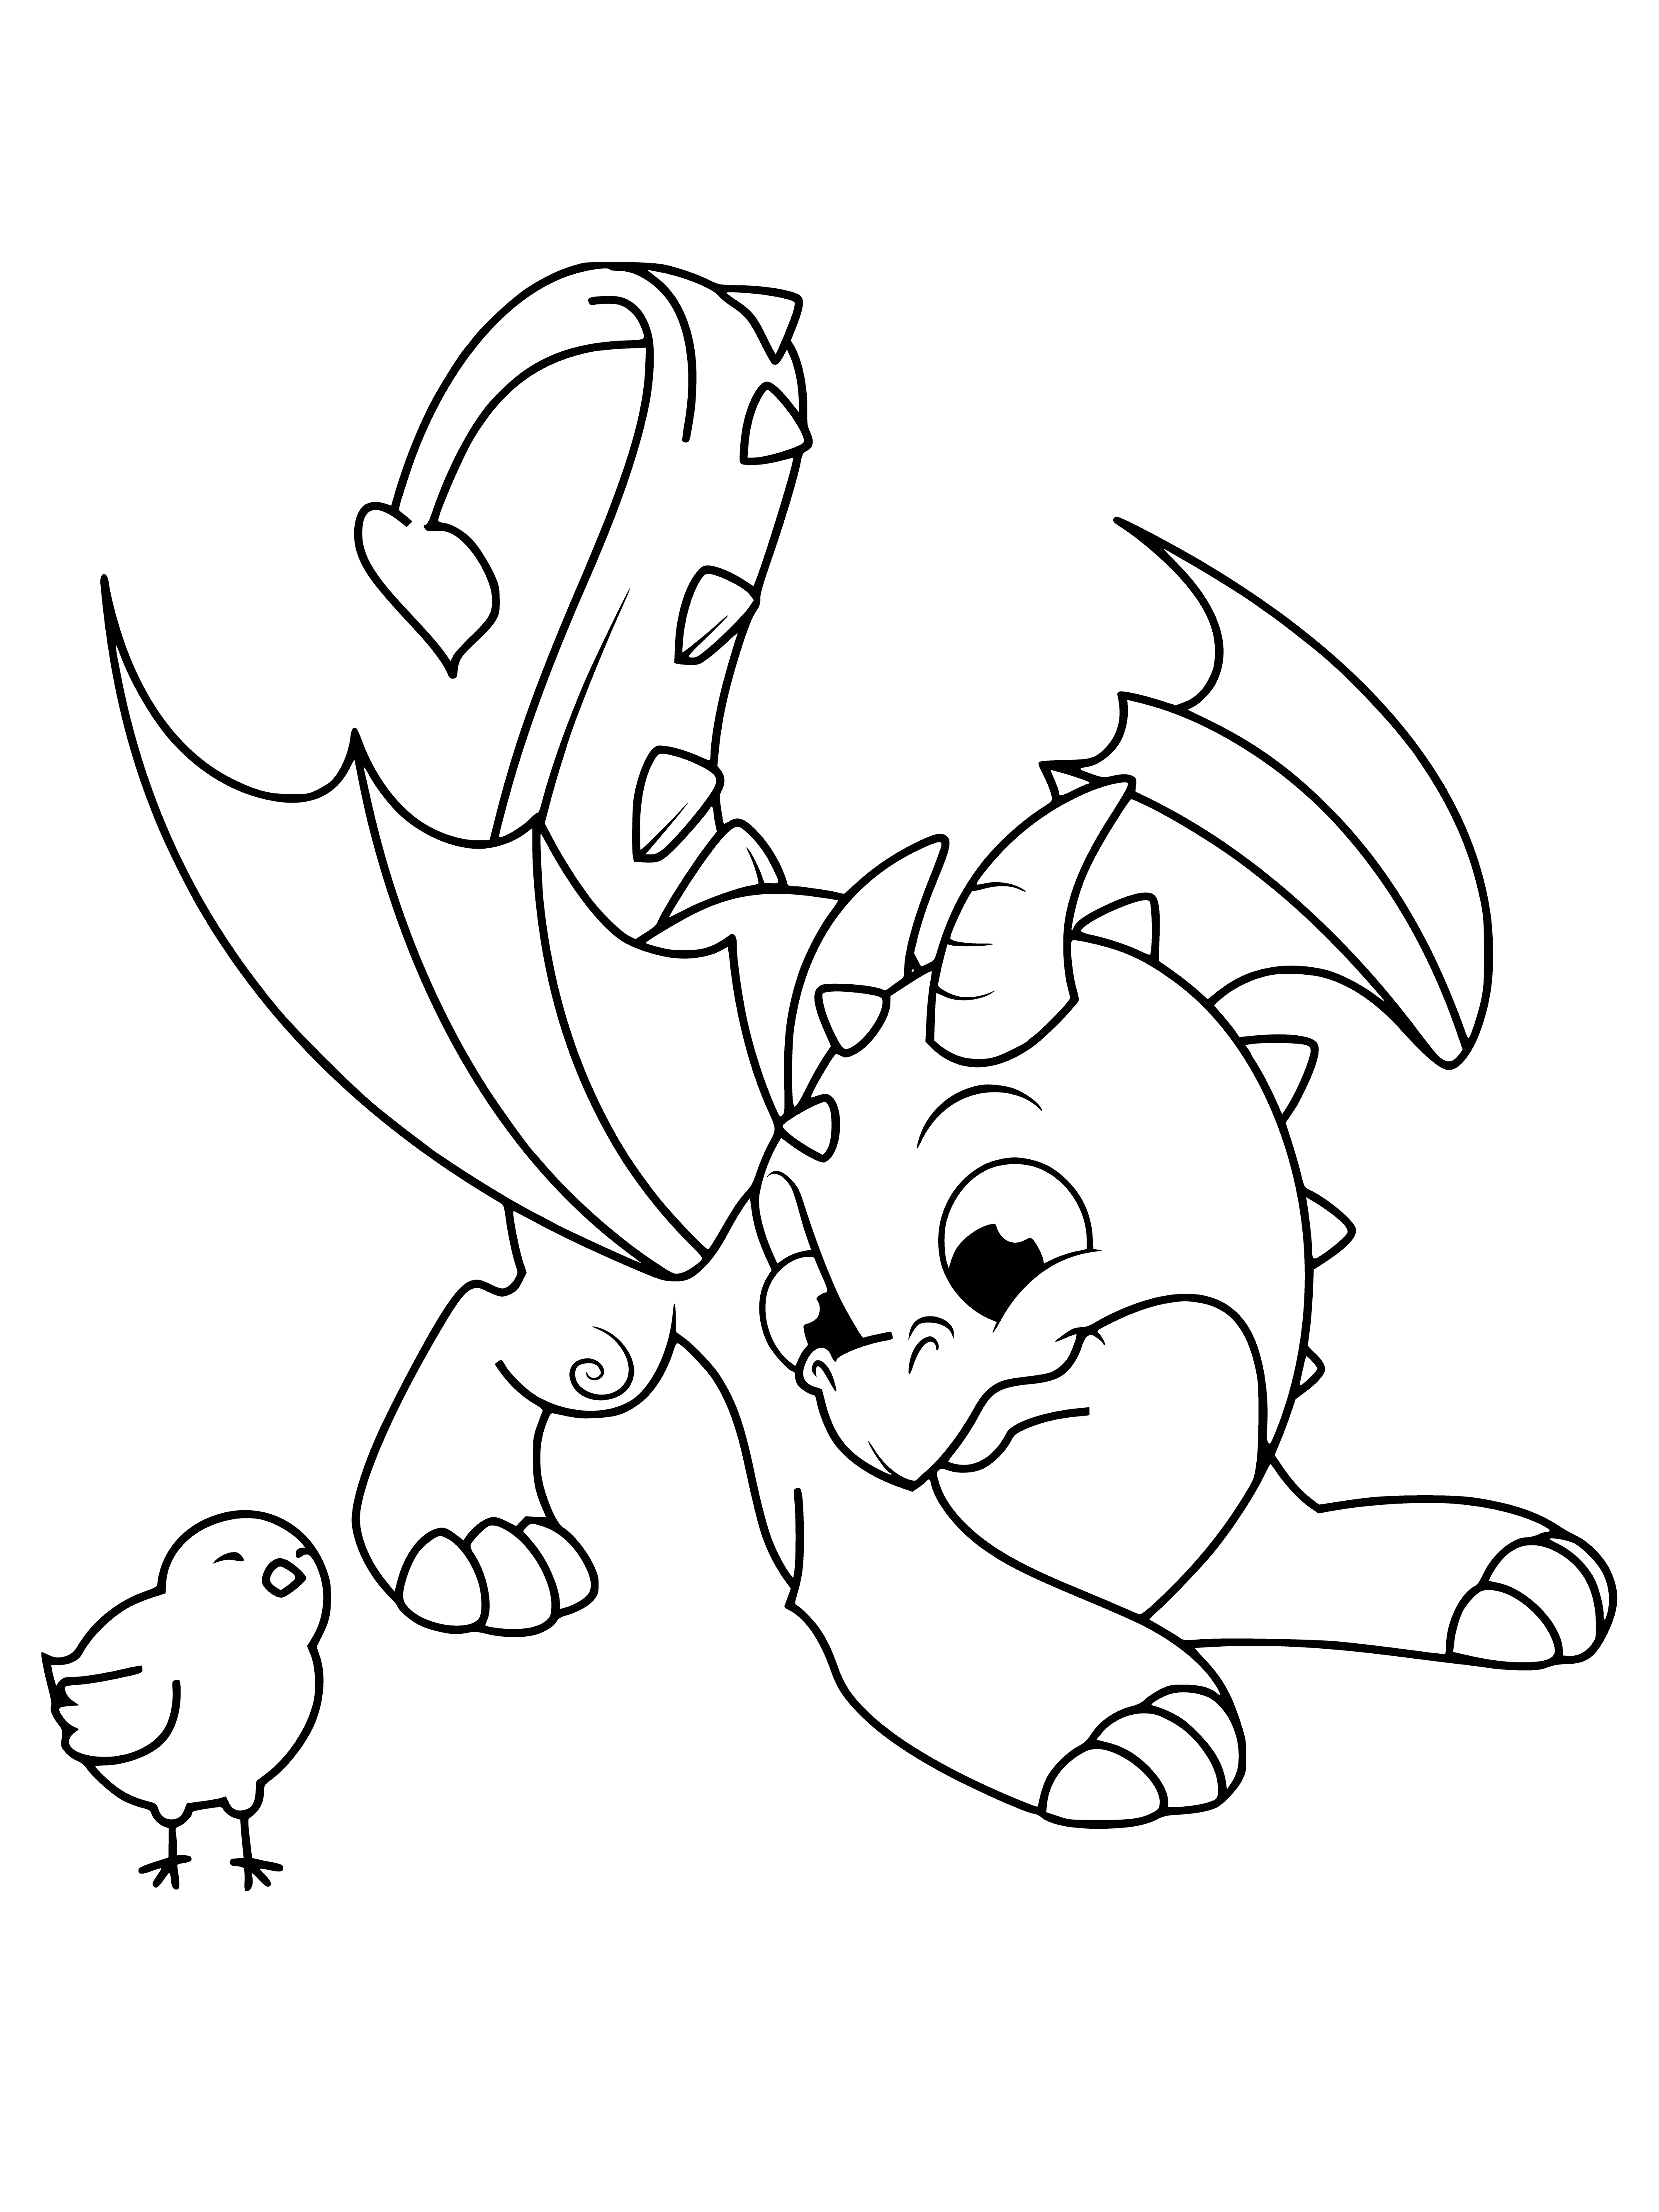 coloring page: Dragon playing with chicken, claws around bird, biting it, chicken trying to escape.